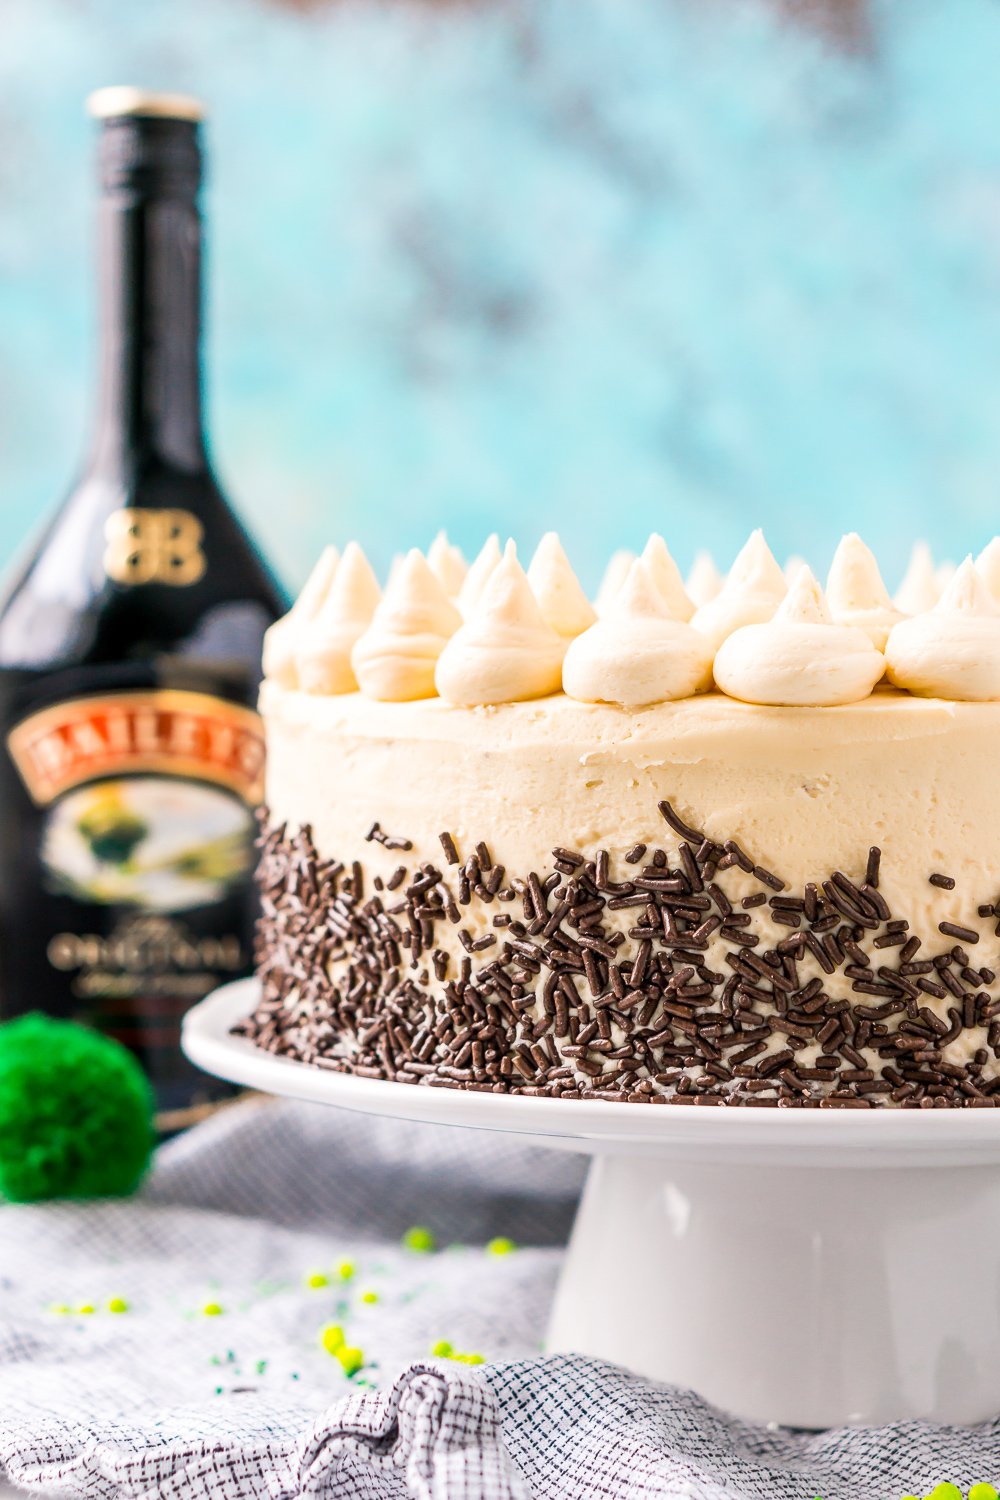 This Chocolate Guinness Cake is made with a rich and tender chocolate cake laced with smooth stout with a chocolate ganache filling and a decadent Irish Cream Frosting!